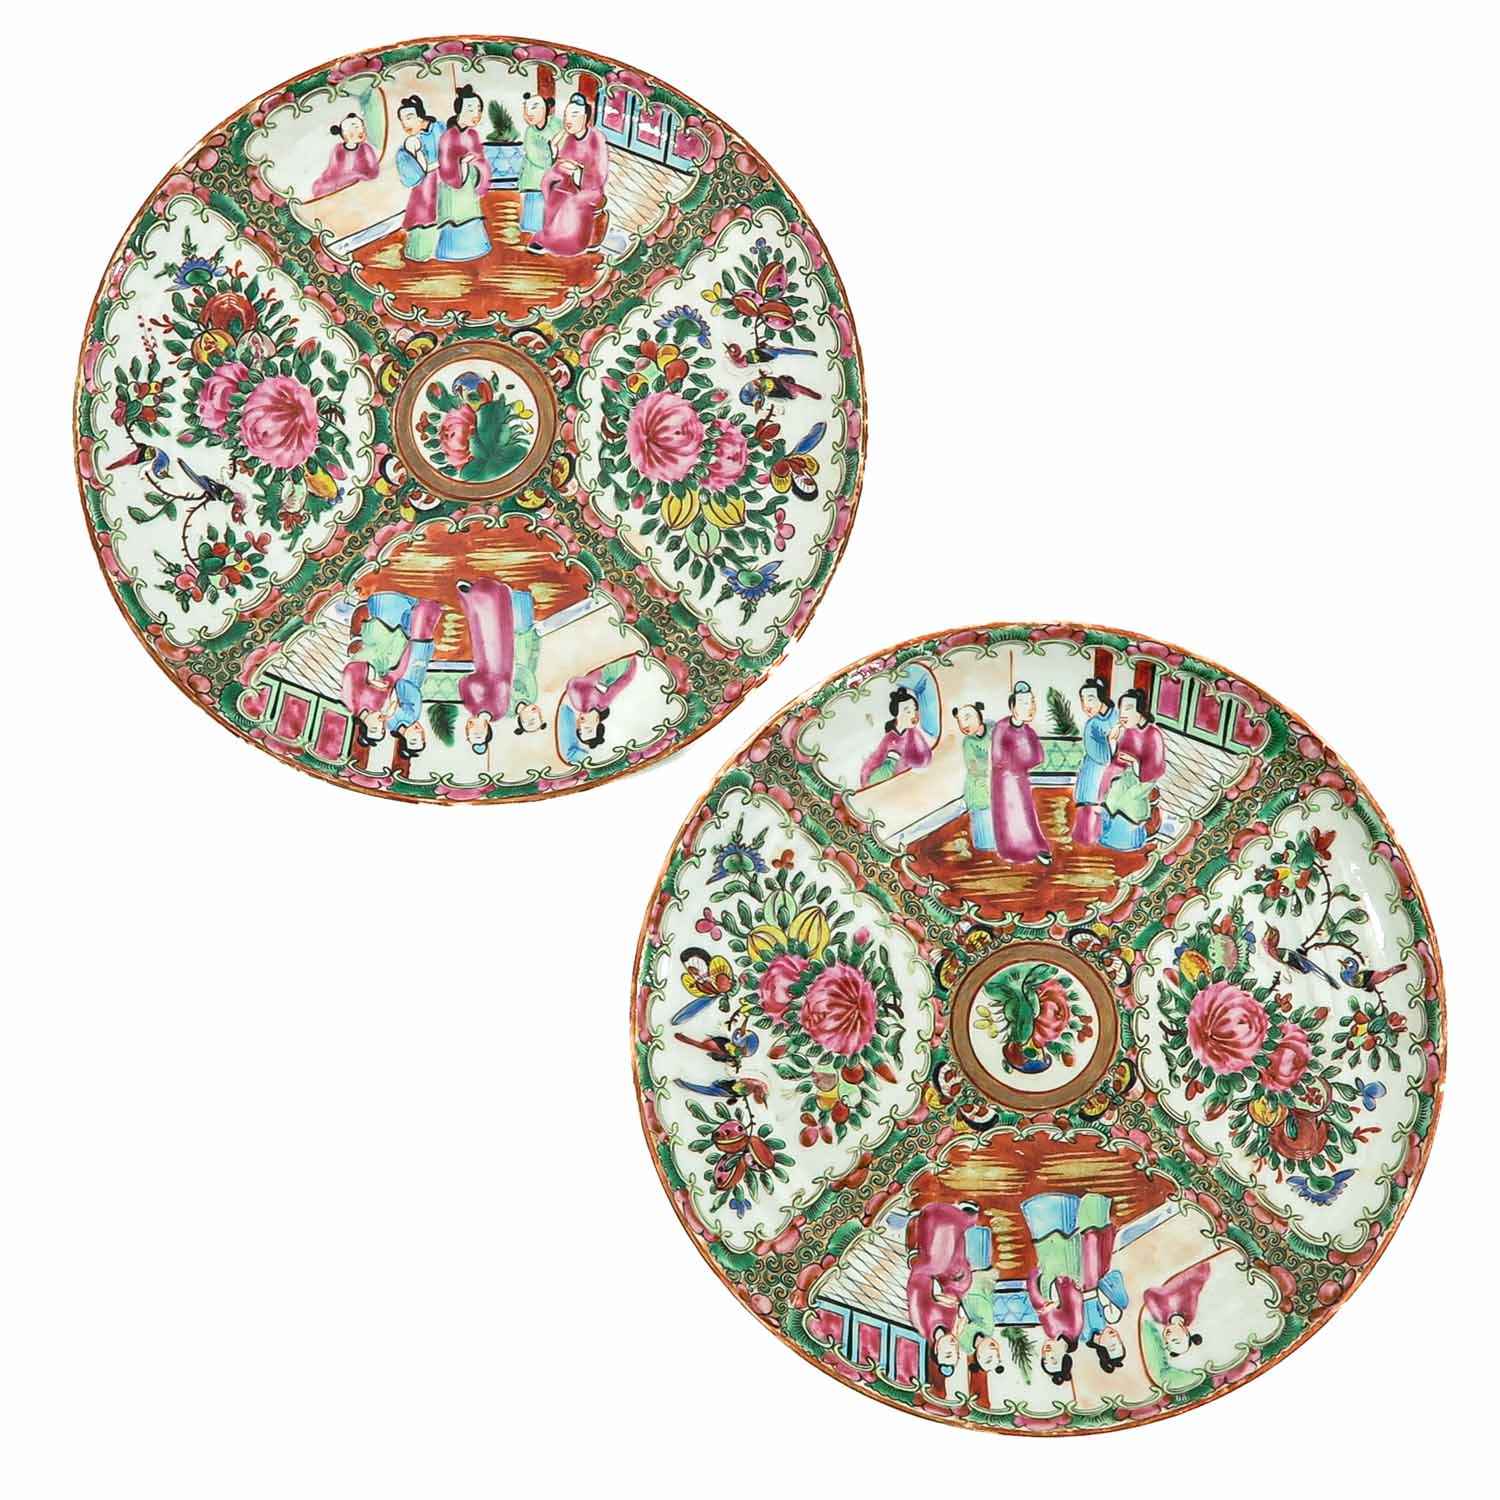 A Pair of Cantonese Plates